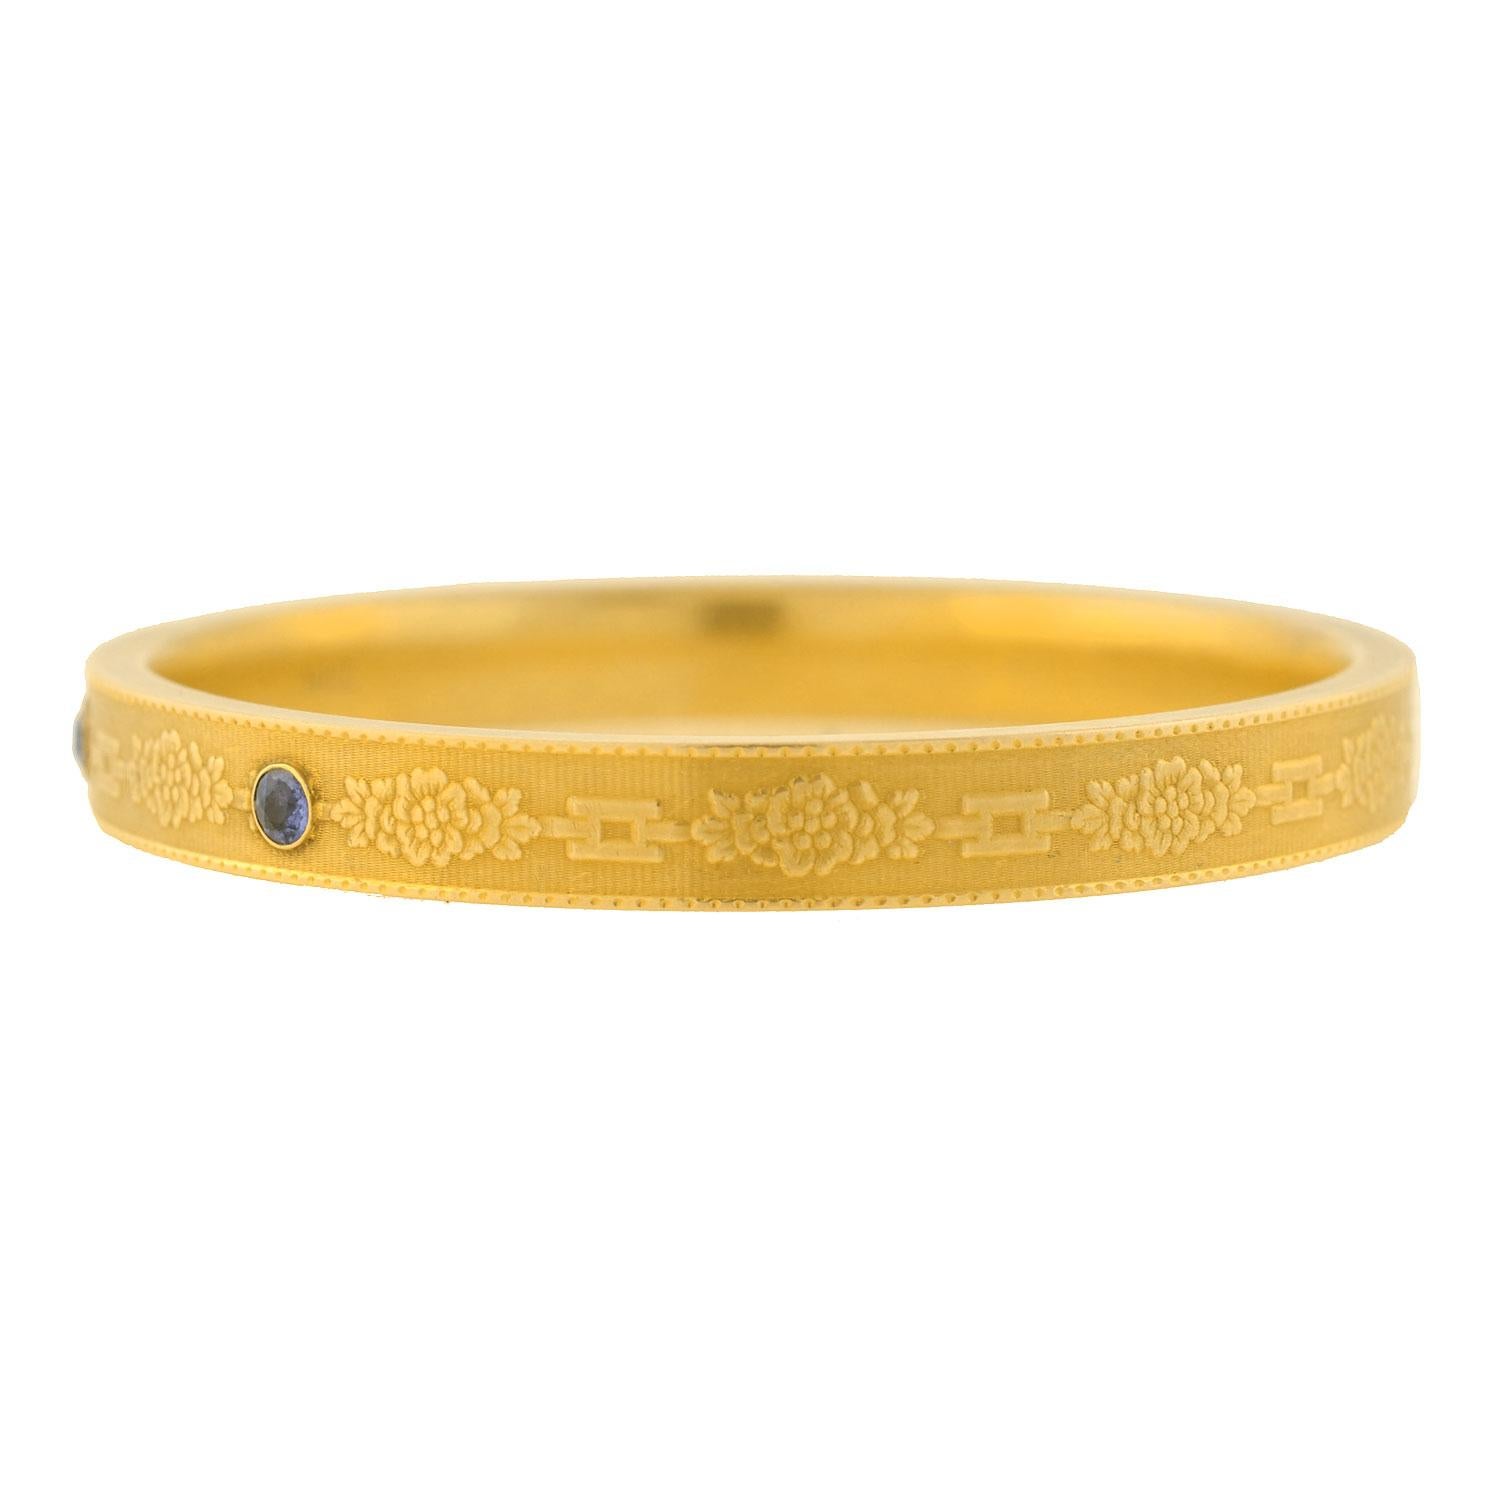 A beautiful signed Krementz bracelet from the late Art Nouveau (ca1915) era! Crafted in 14kt yellow gold, this stunning piece features a unusual and gorgeous textured design showcasing three beautiful sapphire stones. Encircling the entire surface